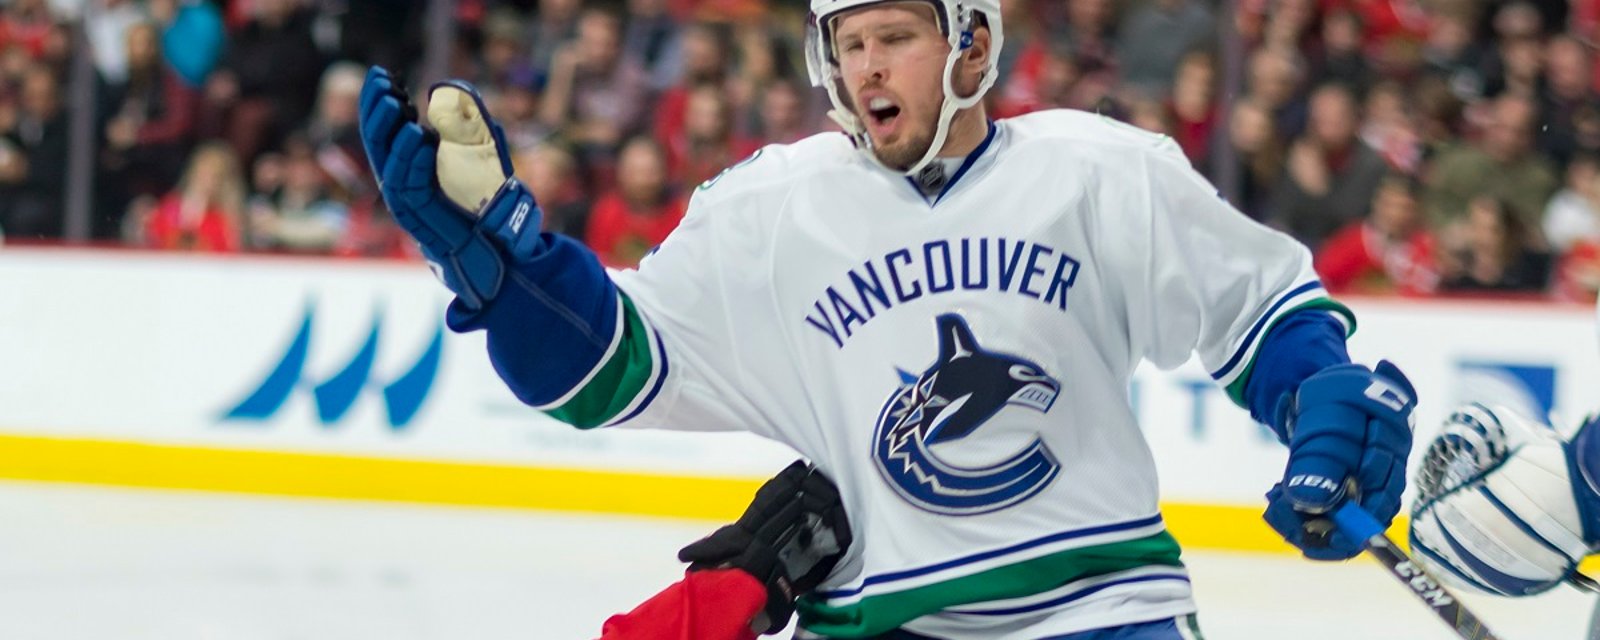 Canucks forced to place defenseman on waivers after adding notorious agitator to the line up.